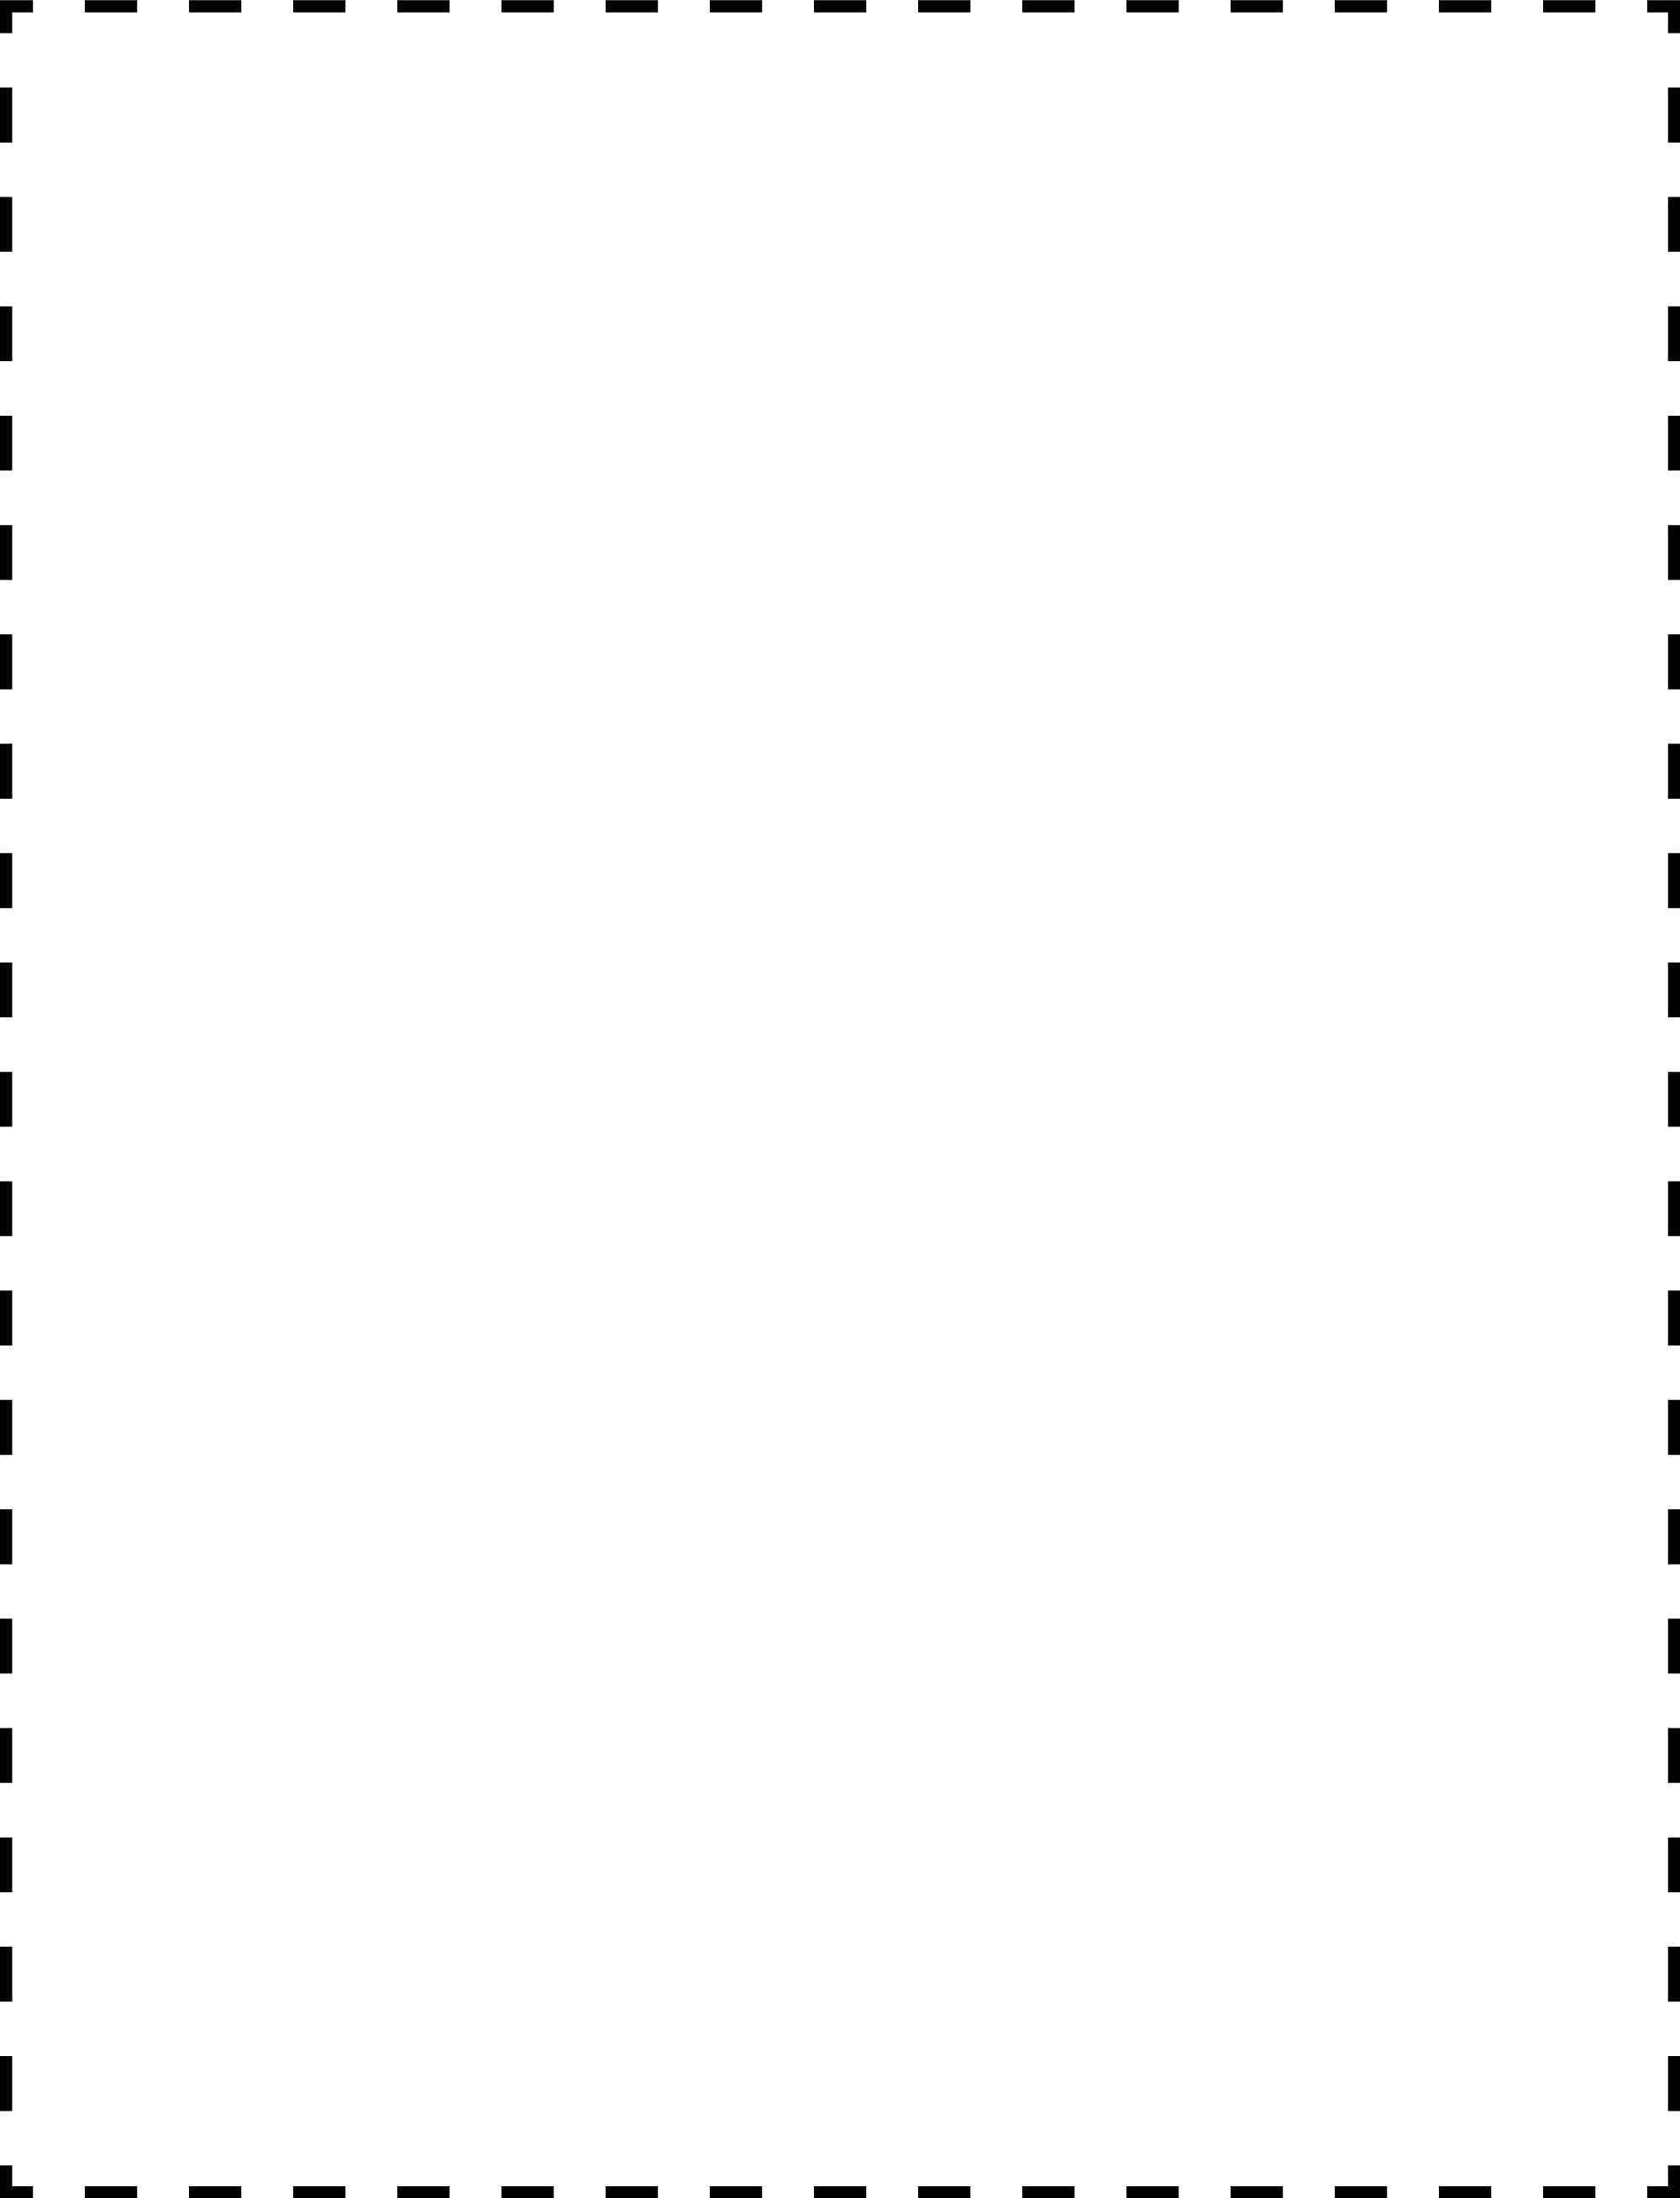 2345-coupon-outline-4x5-k.png